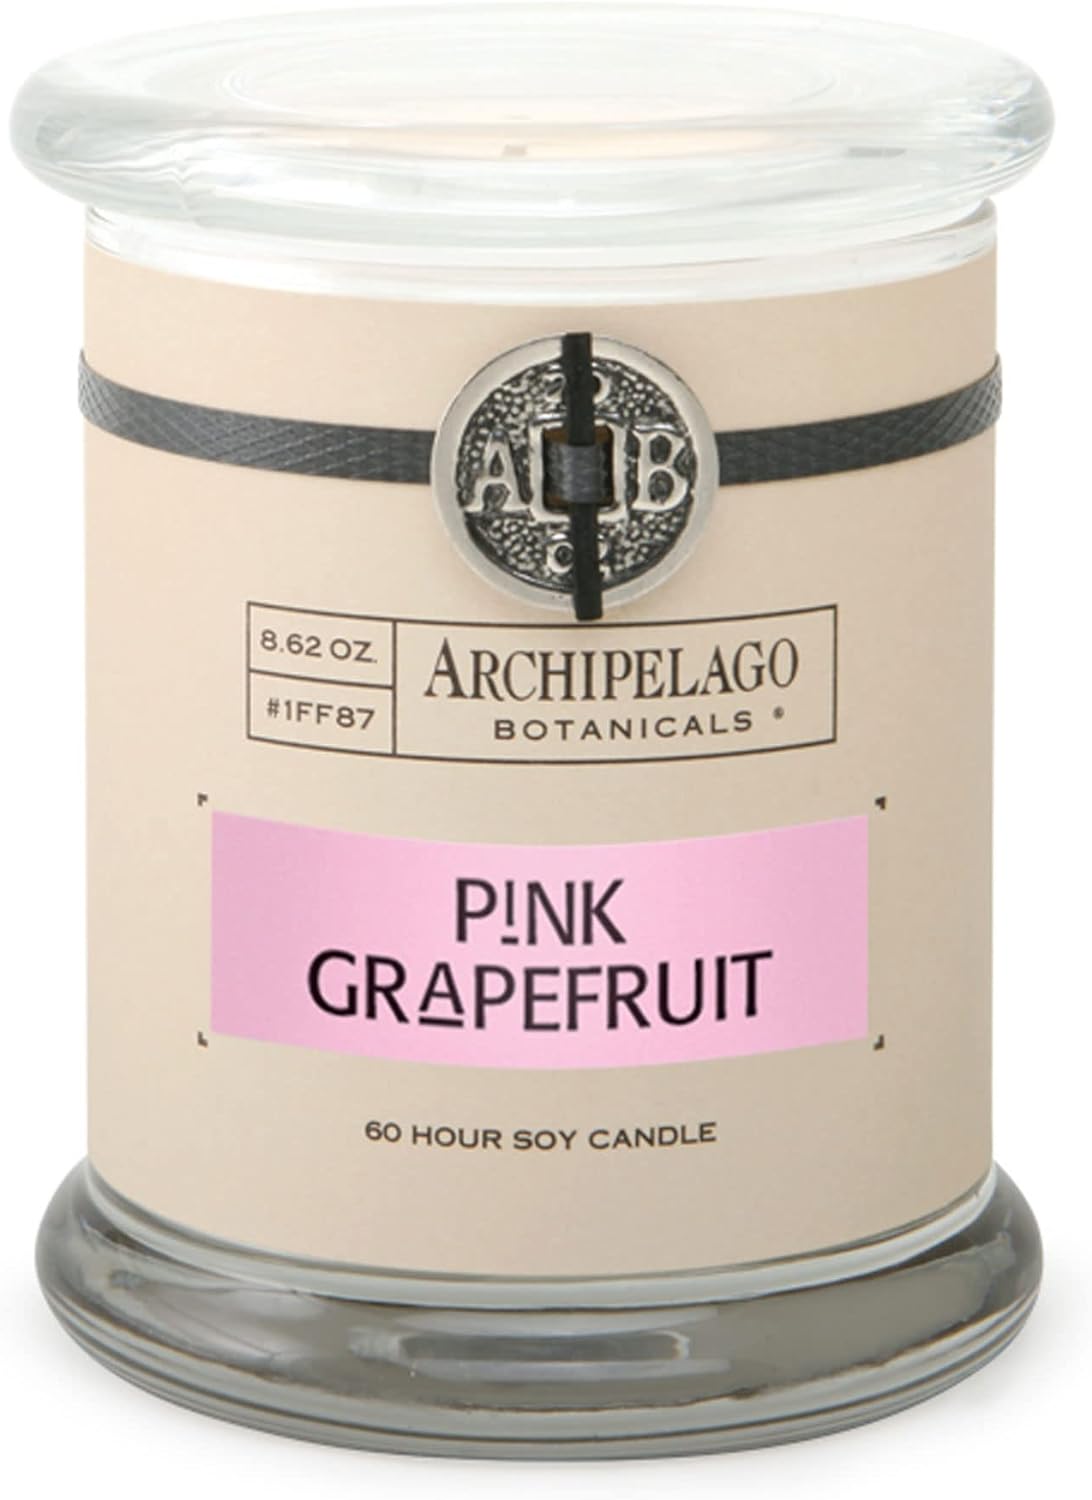 Archipelago Botanicals Soy Candle Hand-Poured Premium Wax, Scented Candle for Home, Burns Approx. 60 Hours, Pink Grapefruit, Glass Candle Jar, 4.5 Inch, 8.6oz